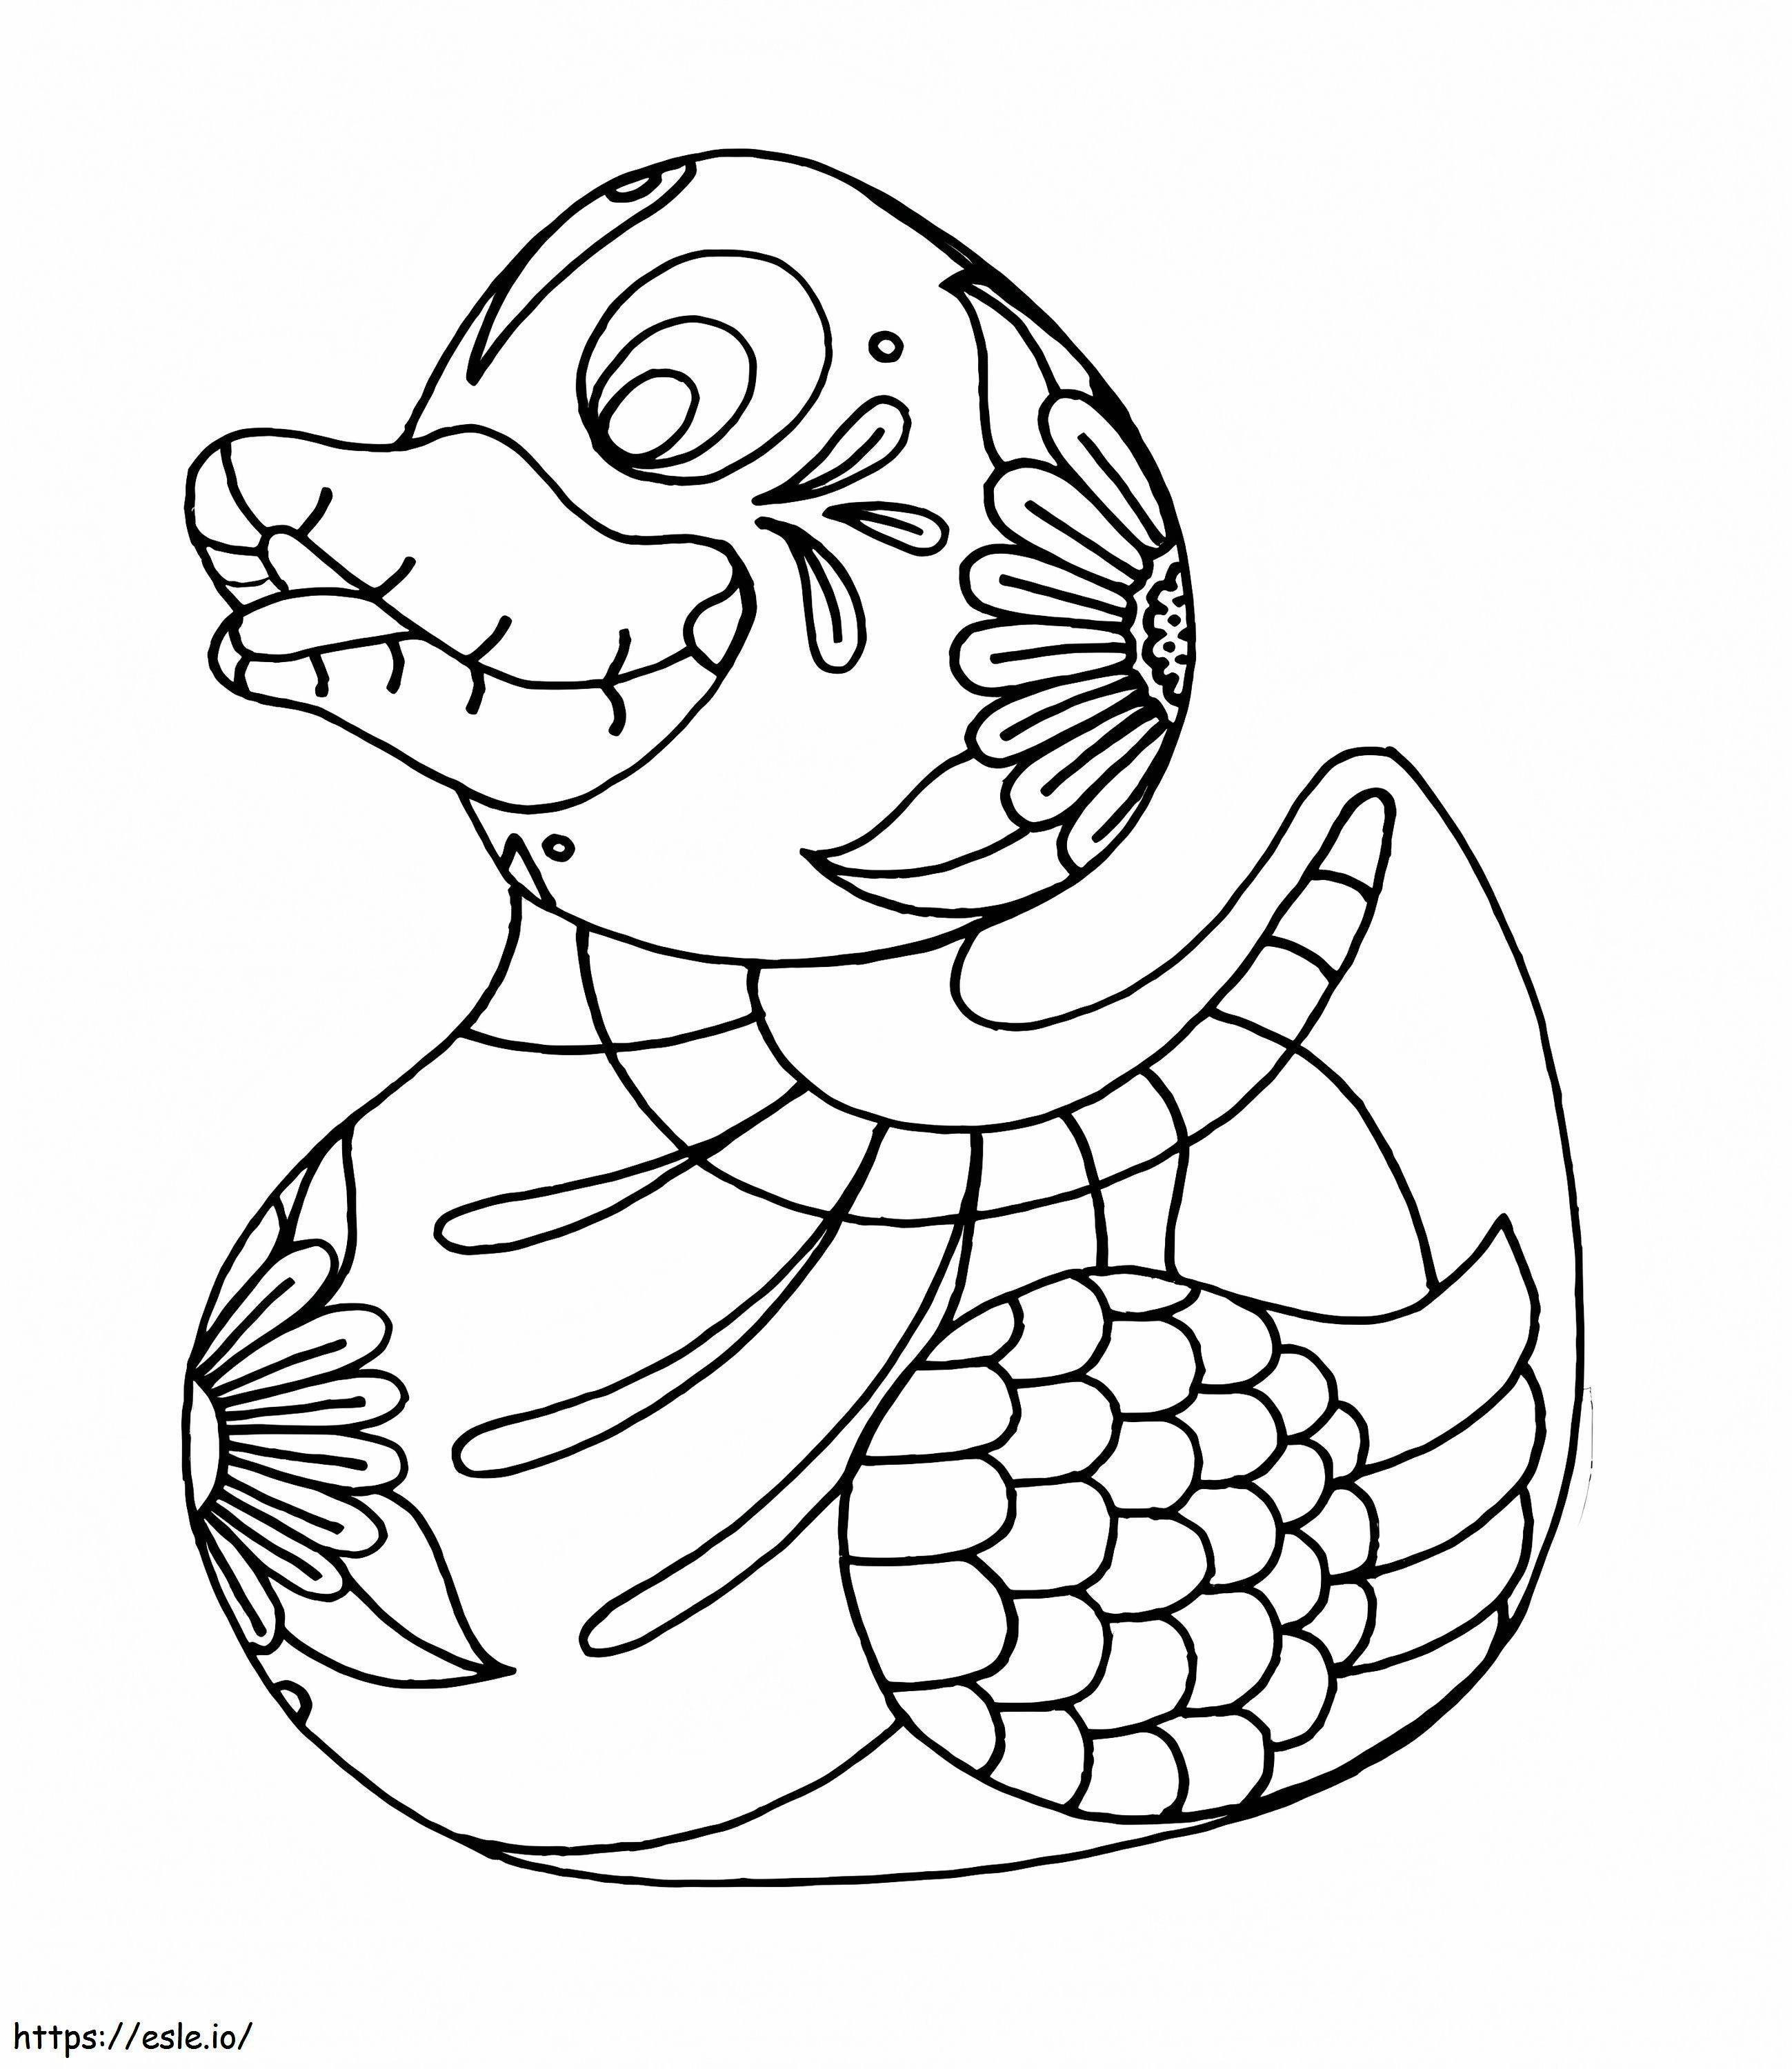 Zentangle Rubber Duck coloring page